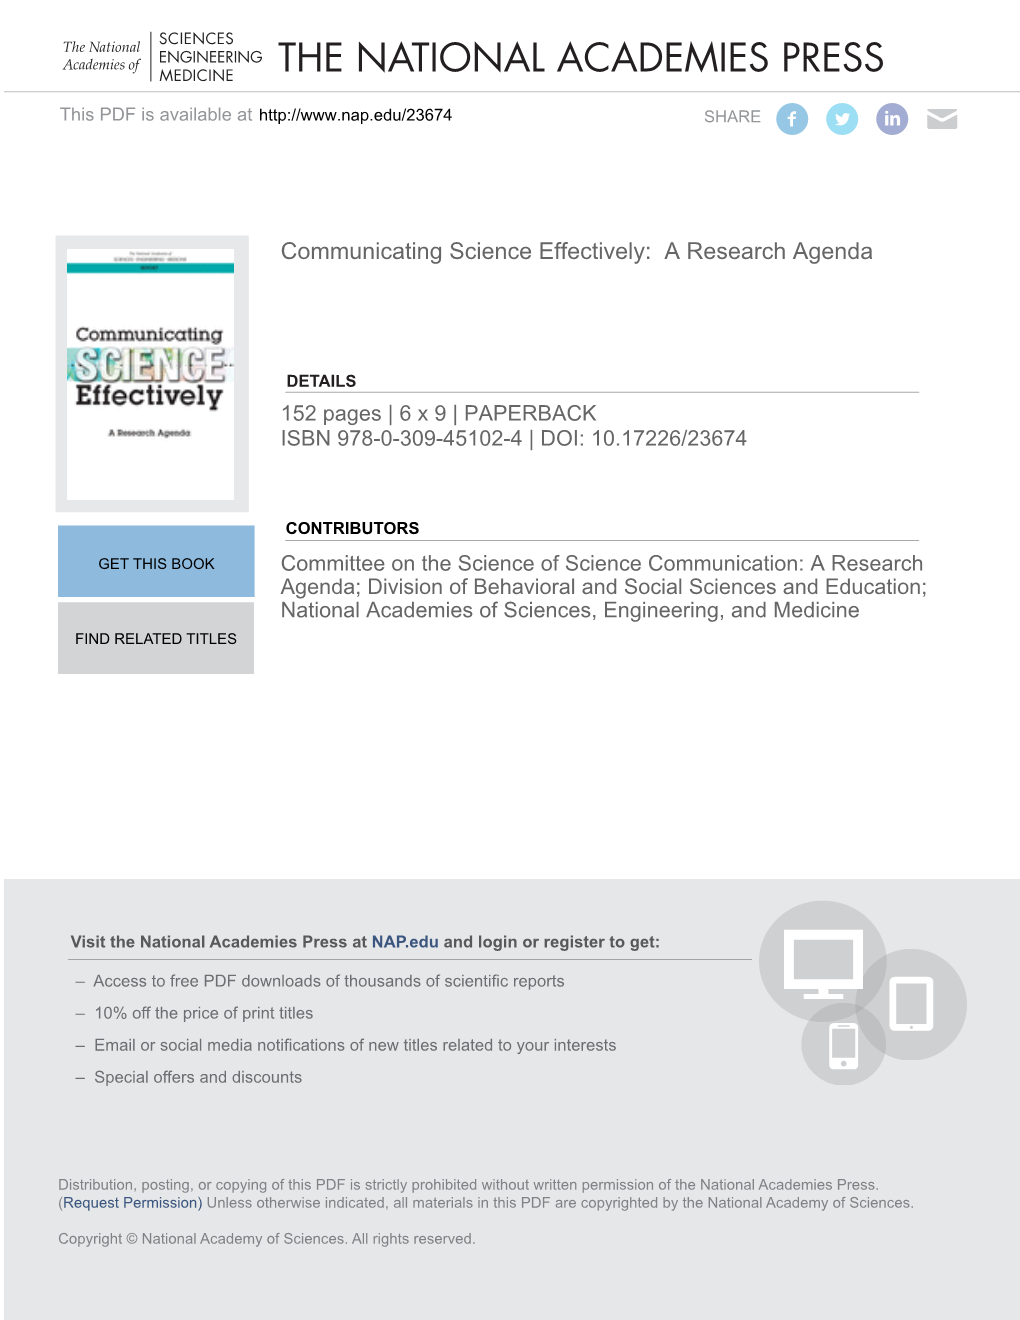 Communicating Science Effectively: a Research Agenda